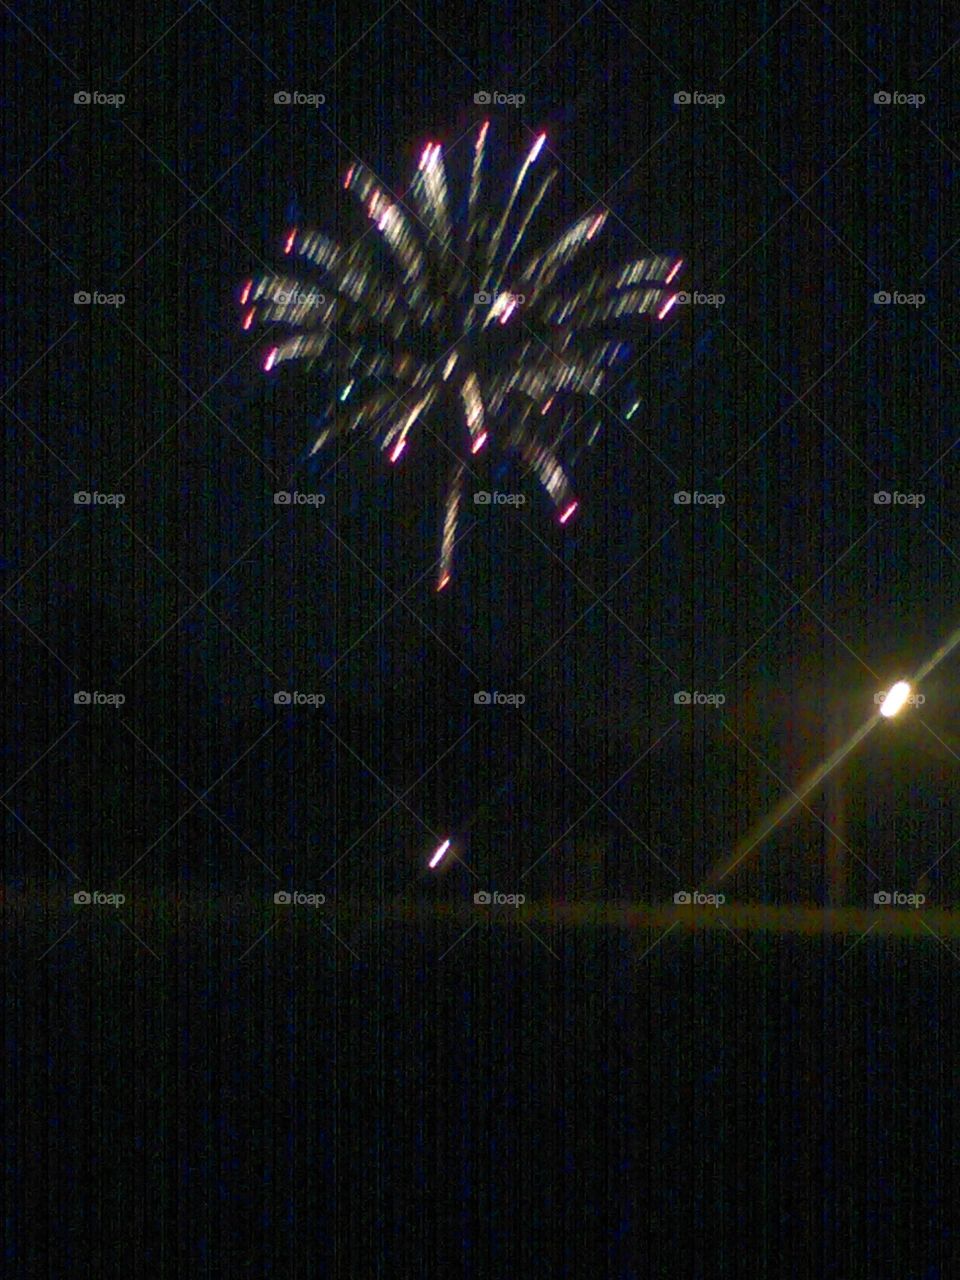 fireworks. me n my son watched as people set fireworks off